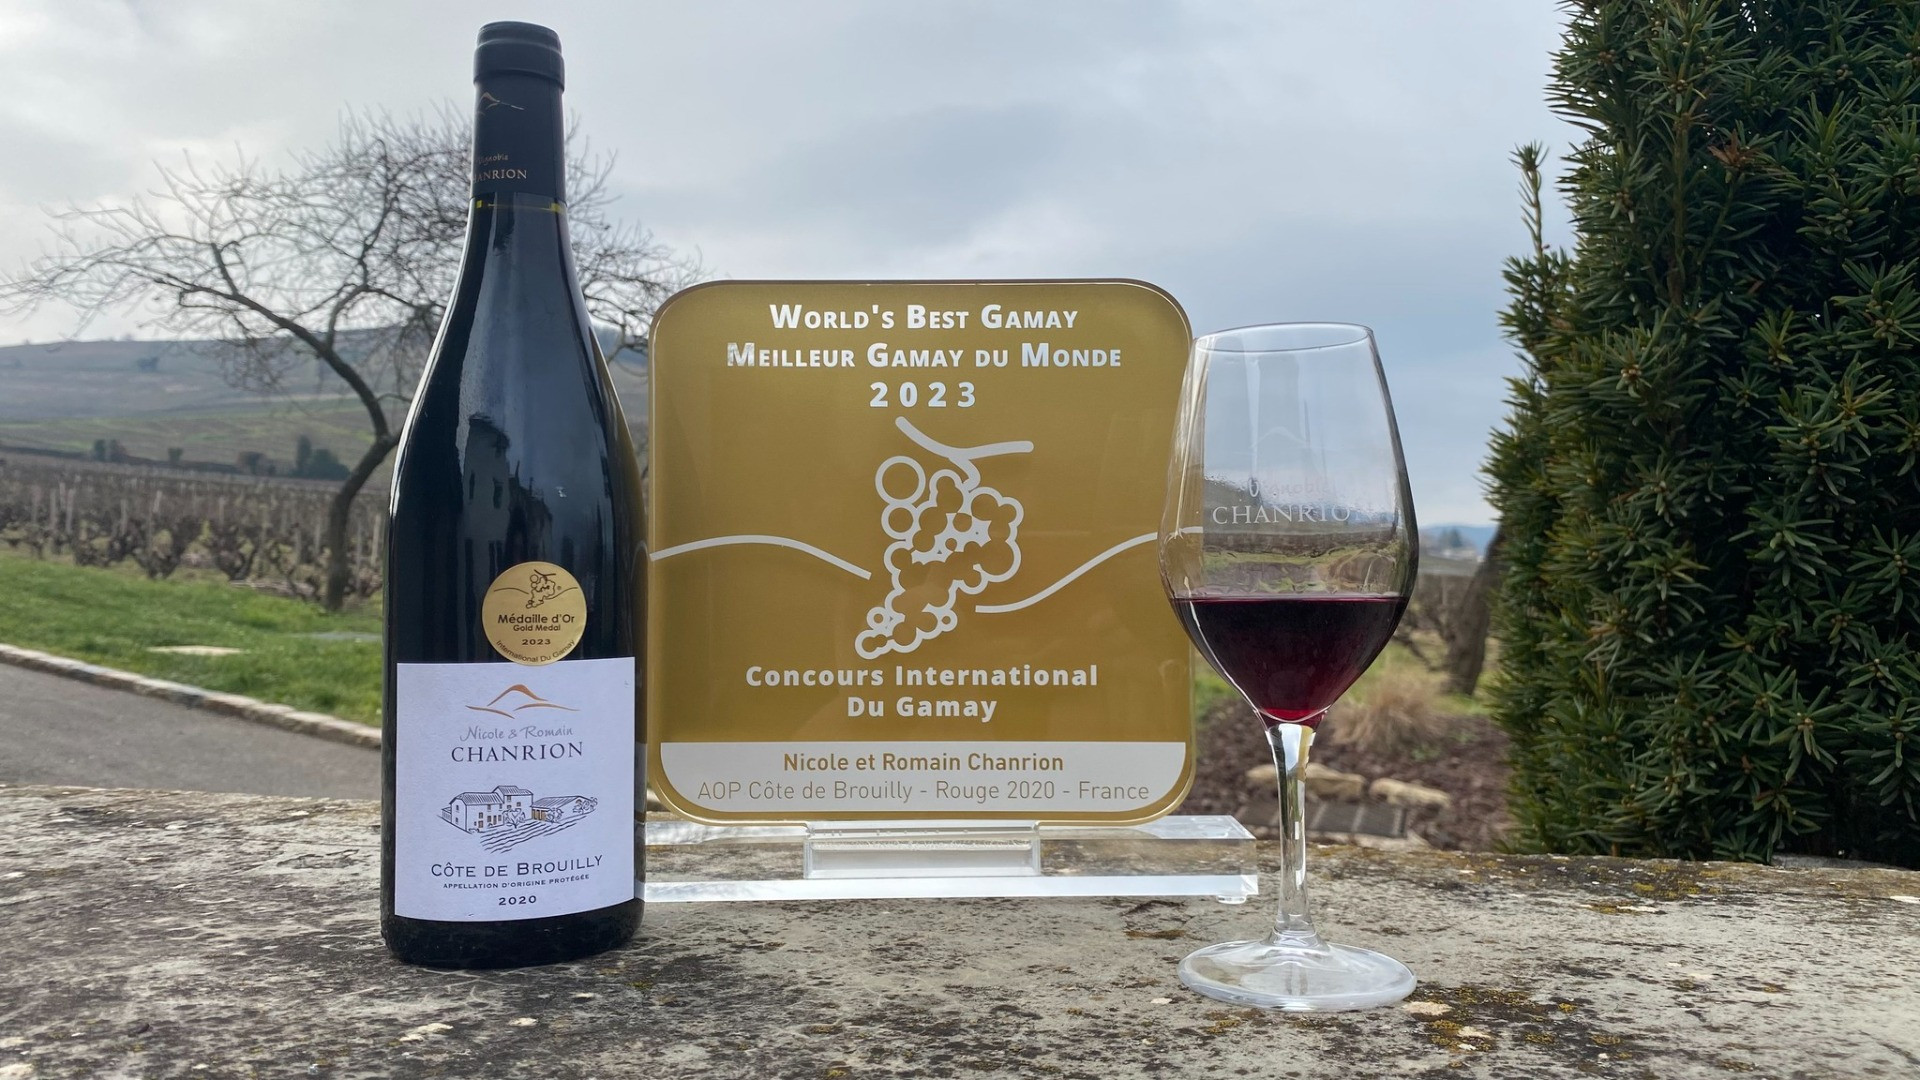 World's best Gamay 2023